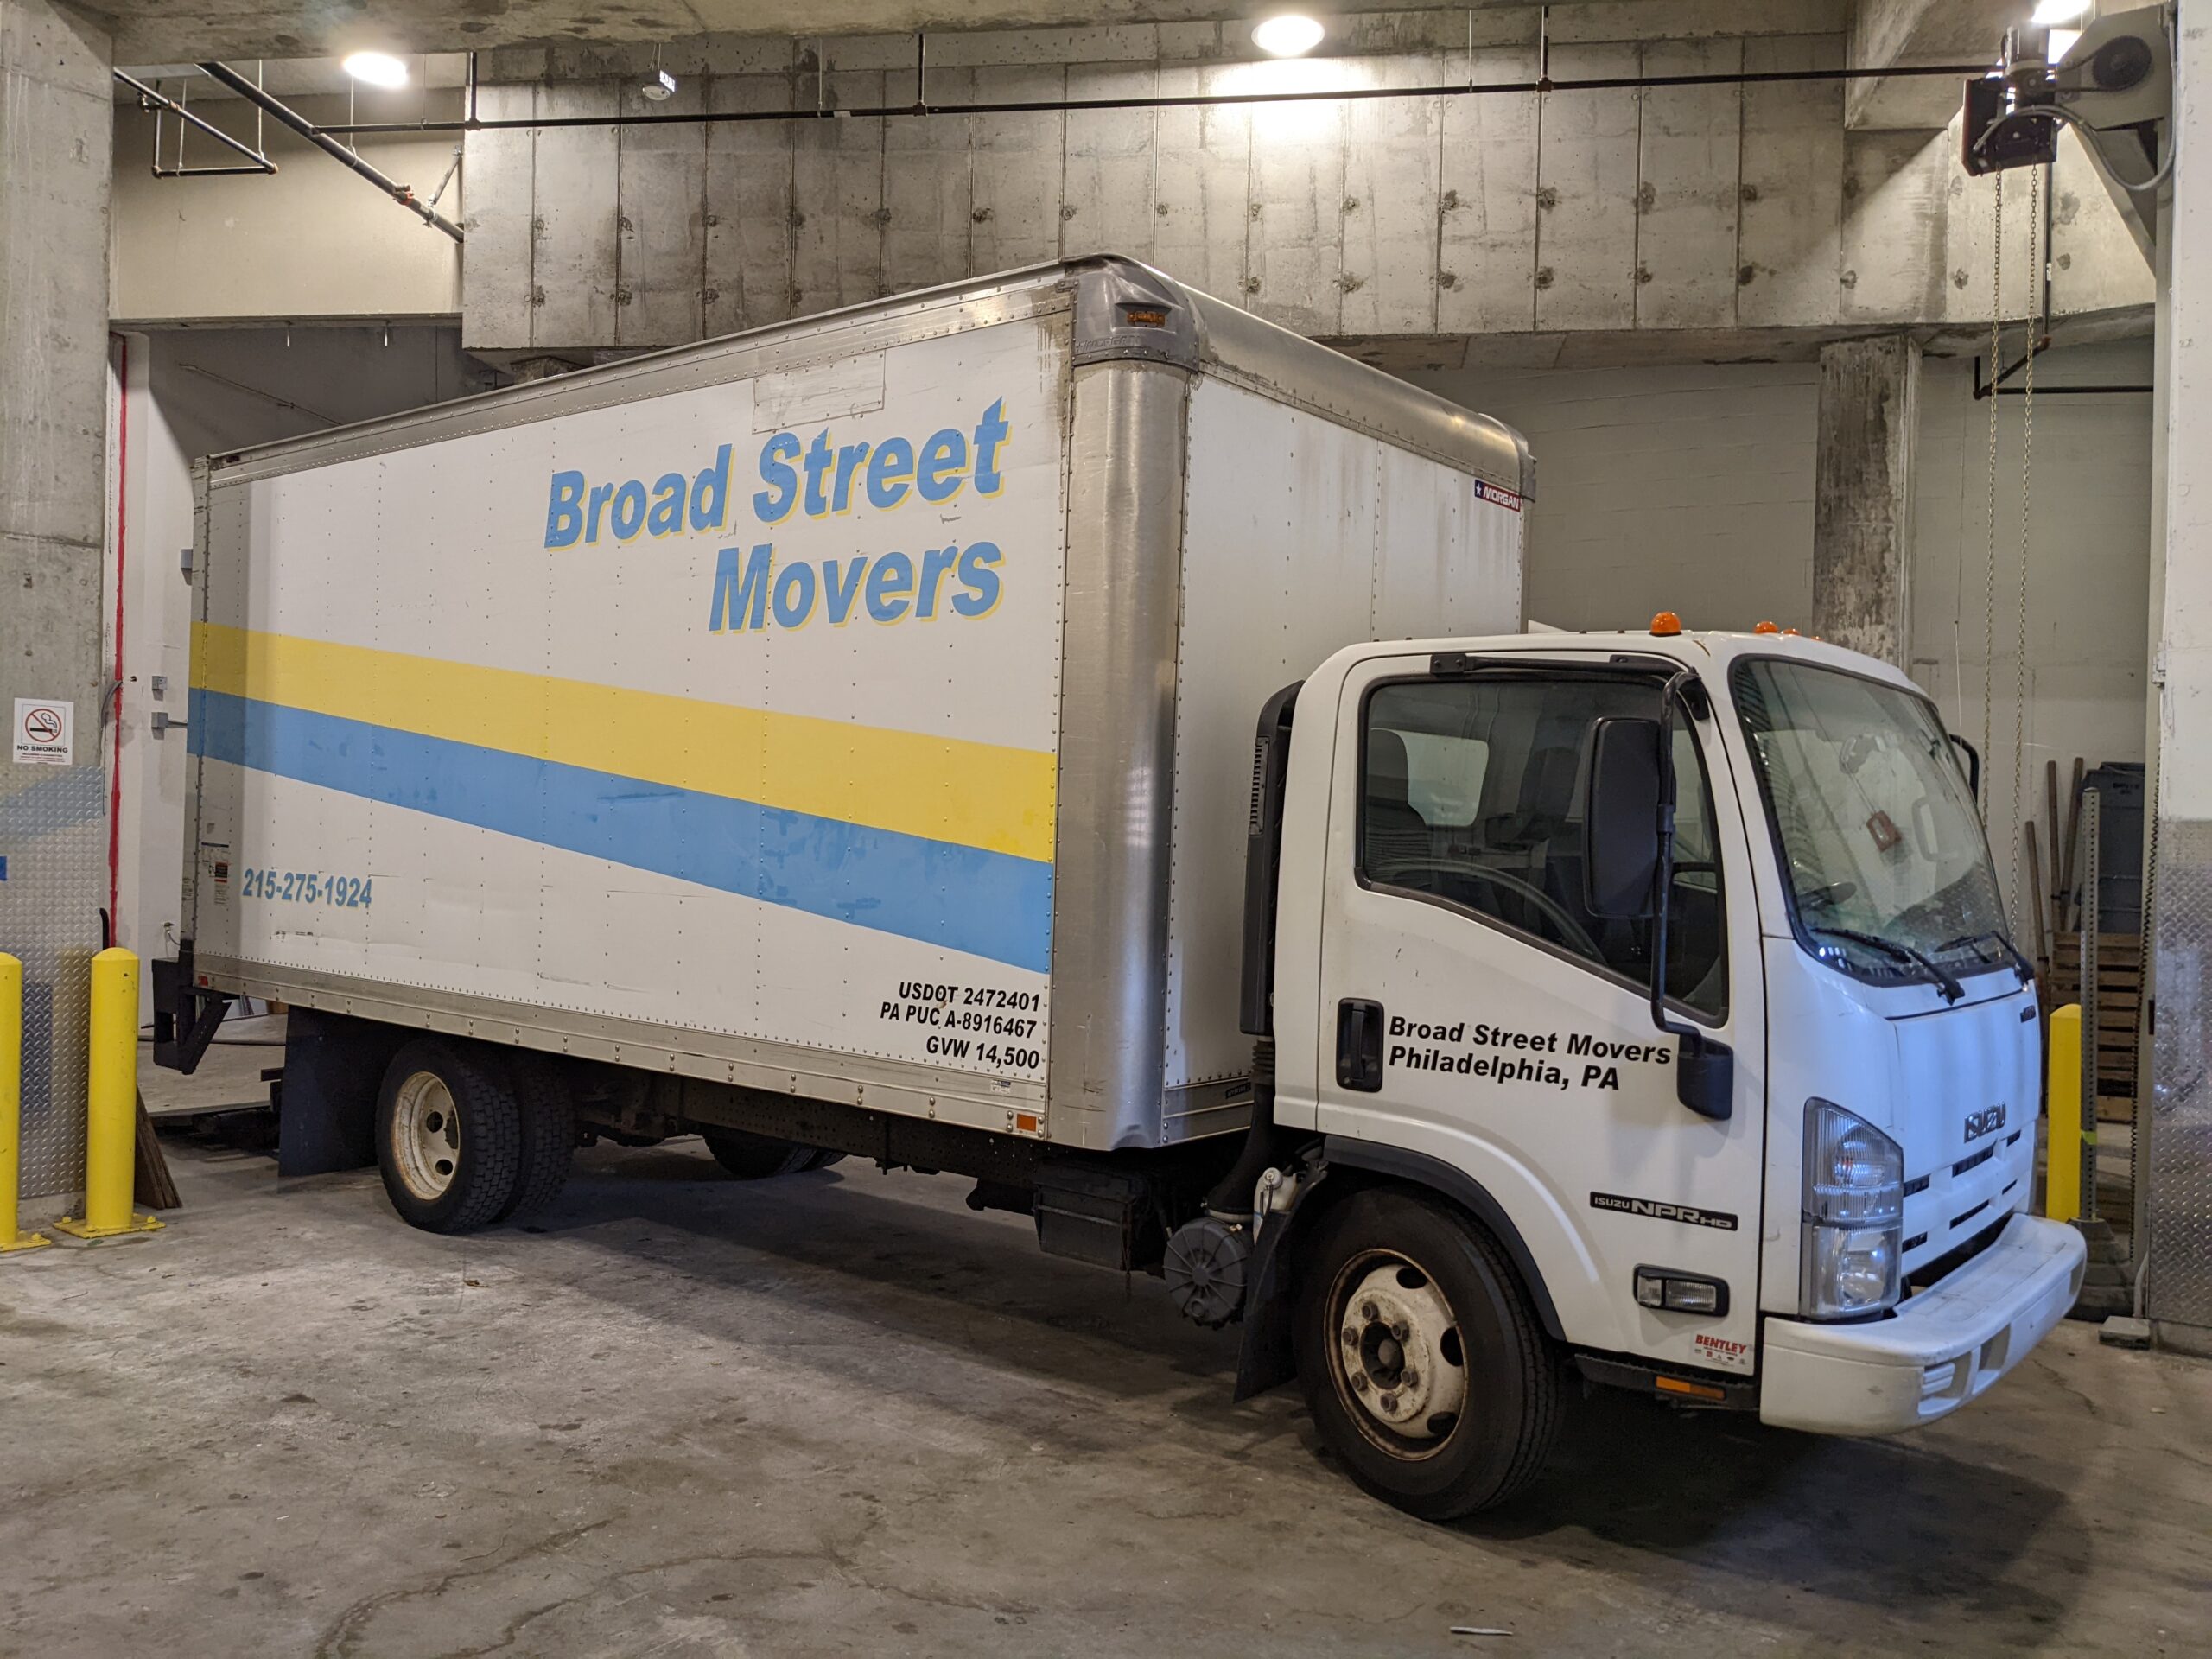 Broad Street Movers moving truck parked inside warehouse located in the Philly area